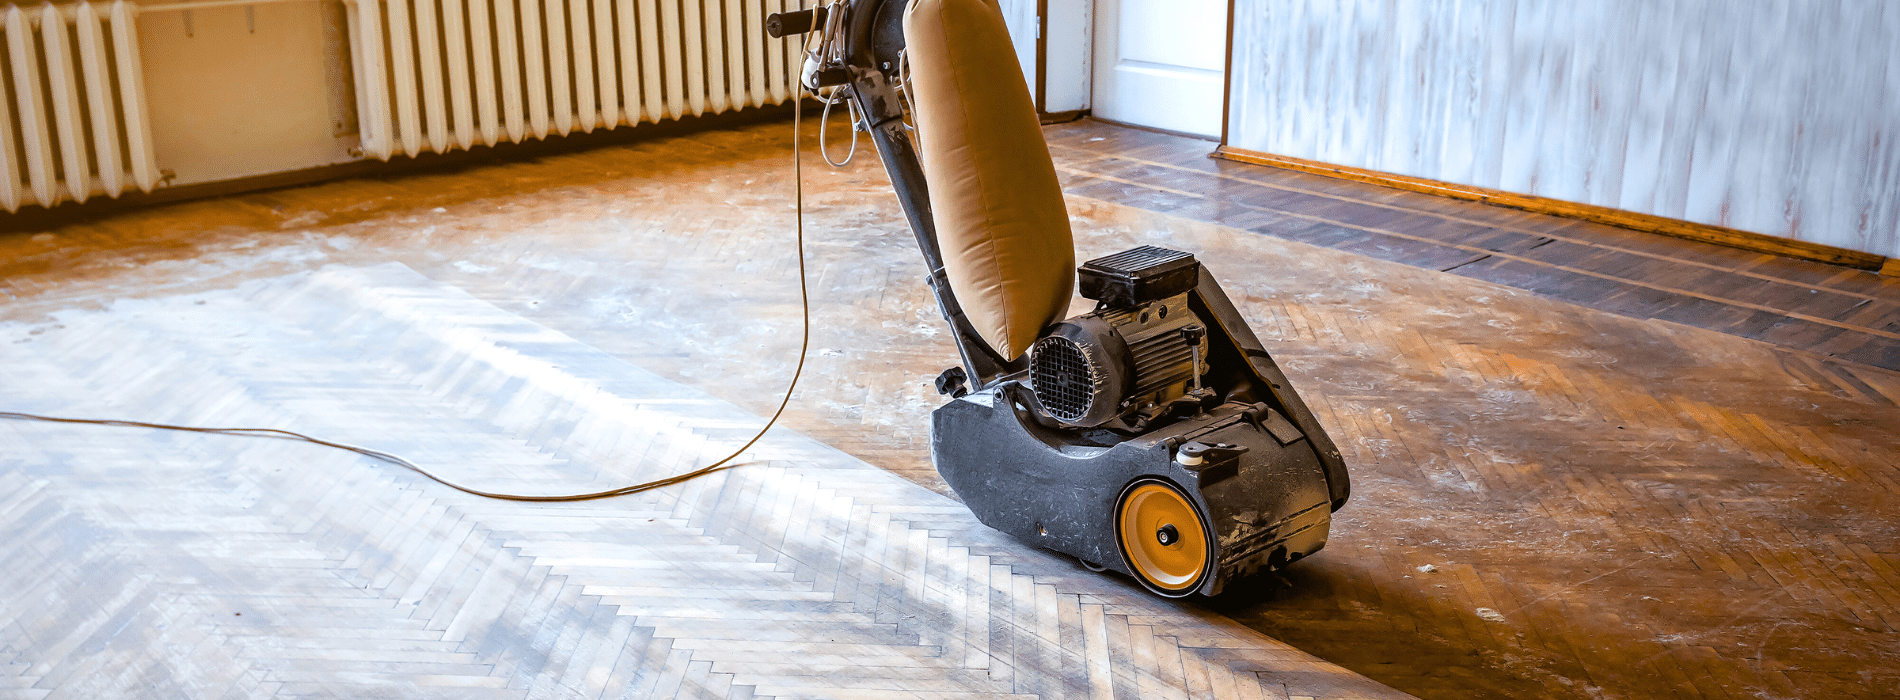 In Eltham, Experience the expertise of Mr Sander® as they skilfully sand a floor using the powerful Bona FlexiSand 2.3 sander. With its impressive 409 mm dimension and 2.1 kW effect, this versatile tool caters to various tasks like bare wood sanding, fine sanding, oiling, and concrete grinding. Operating at 330 V and 60 Hz/70 Hz, it ensures exceptional performance. Connected to a dust extraction system with a HEPA filter, cleanliness and efficiency are guaranteed. Trust Mr Sander® for herringbone floor sanding projects, where state-of-the-art equipment and expertise combine to deliver outstanding results.